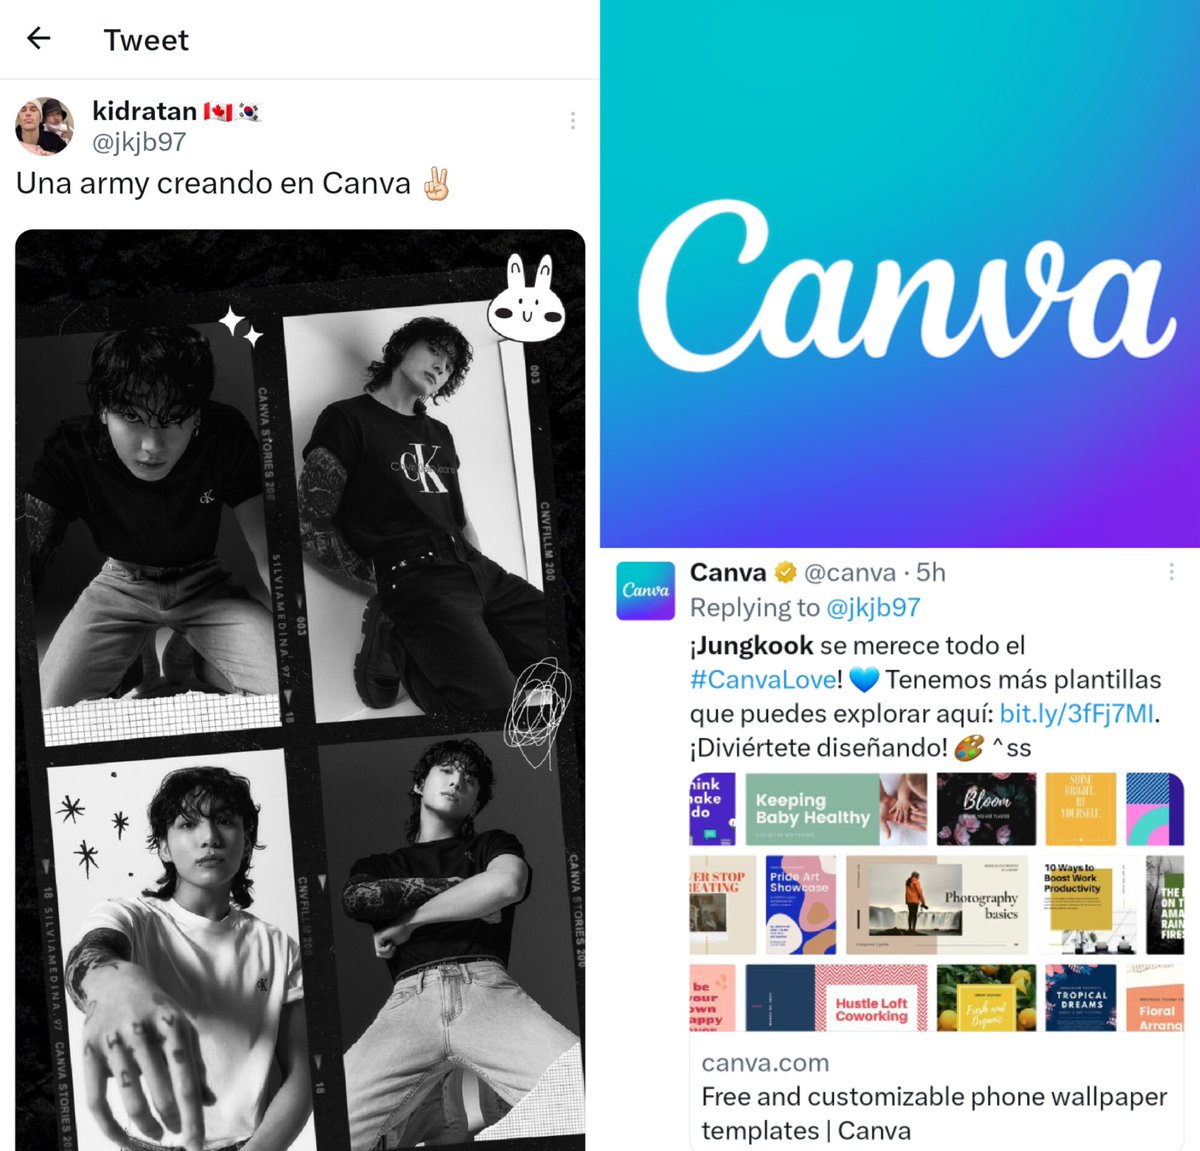 Canva, world's most inclusive visual communications platform and free-to-use online graphic design tool, replied to a fan tweet about Jungkook

“Jungkook deserves all the #CanvaLove!💙” and shared more customizable phone wallpaper templates.